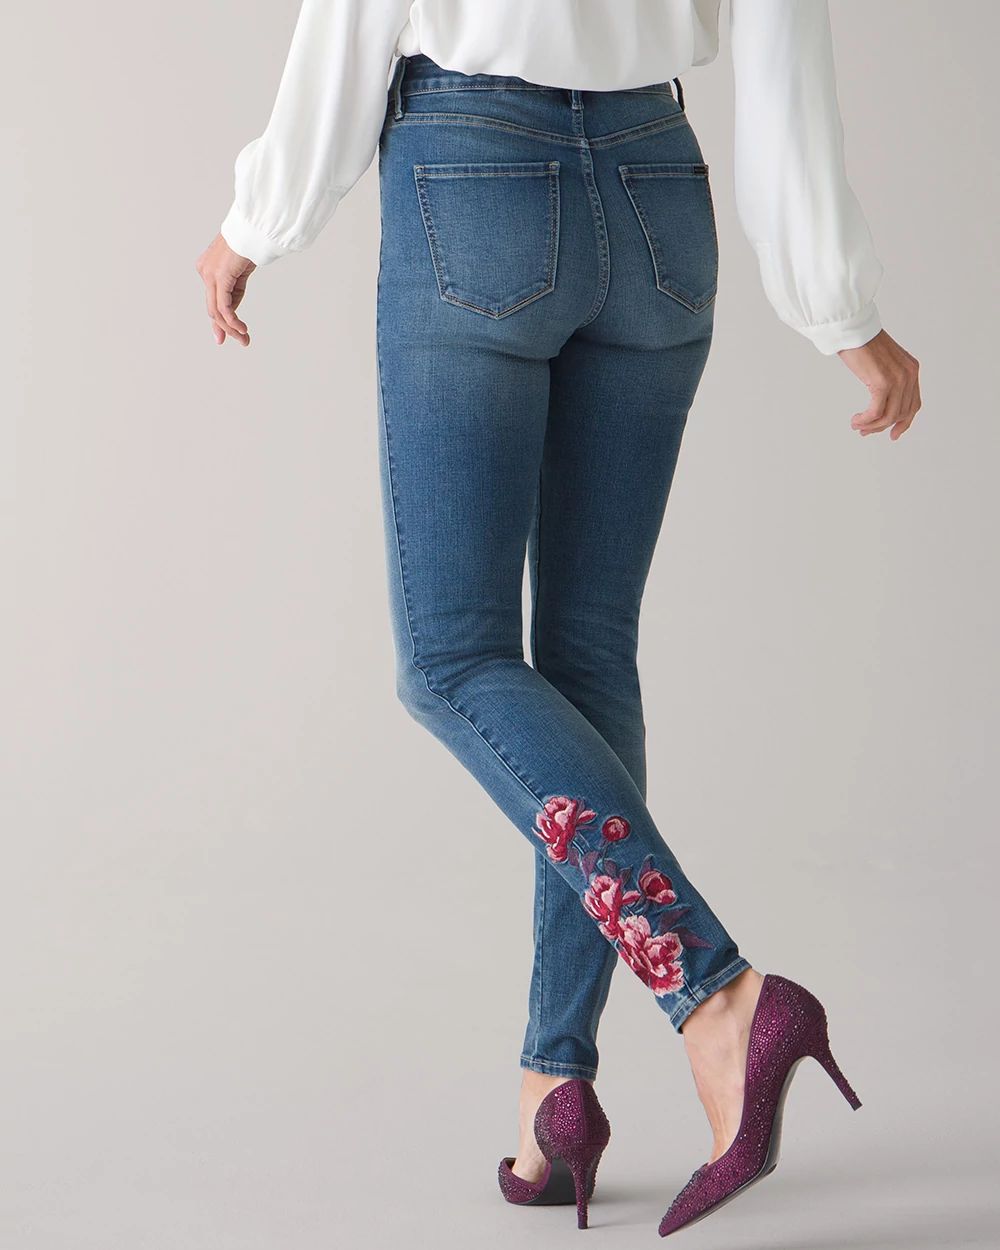 High-Rise Rose Embroidered Skinny Jean click to view larger image.